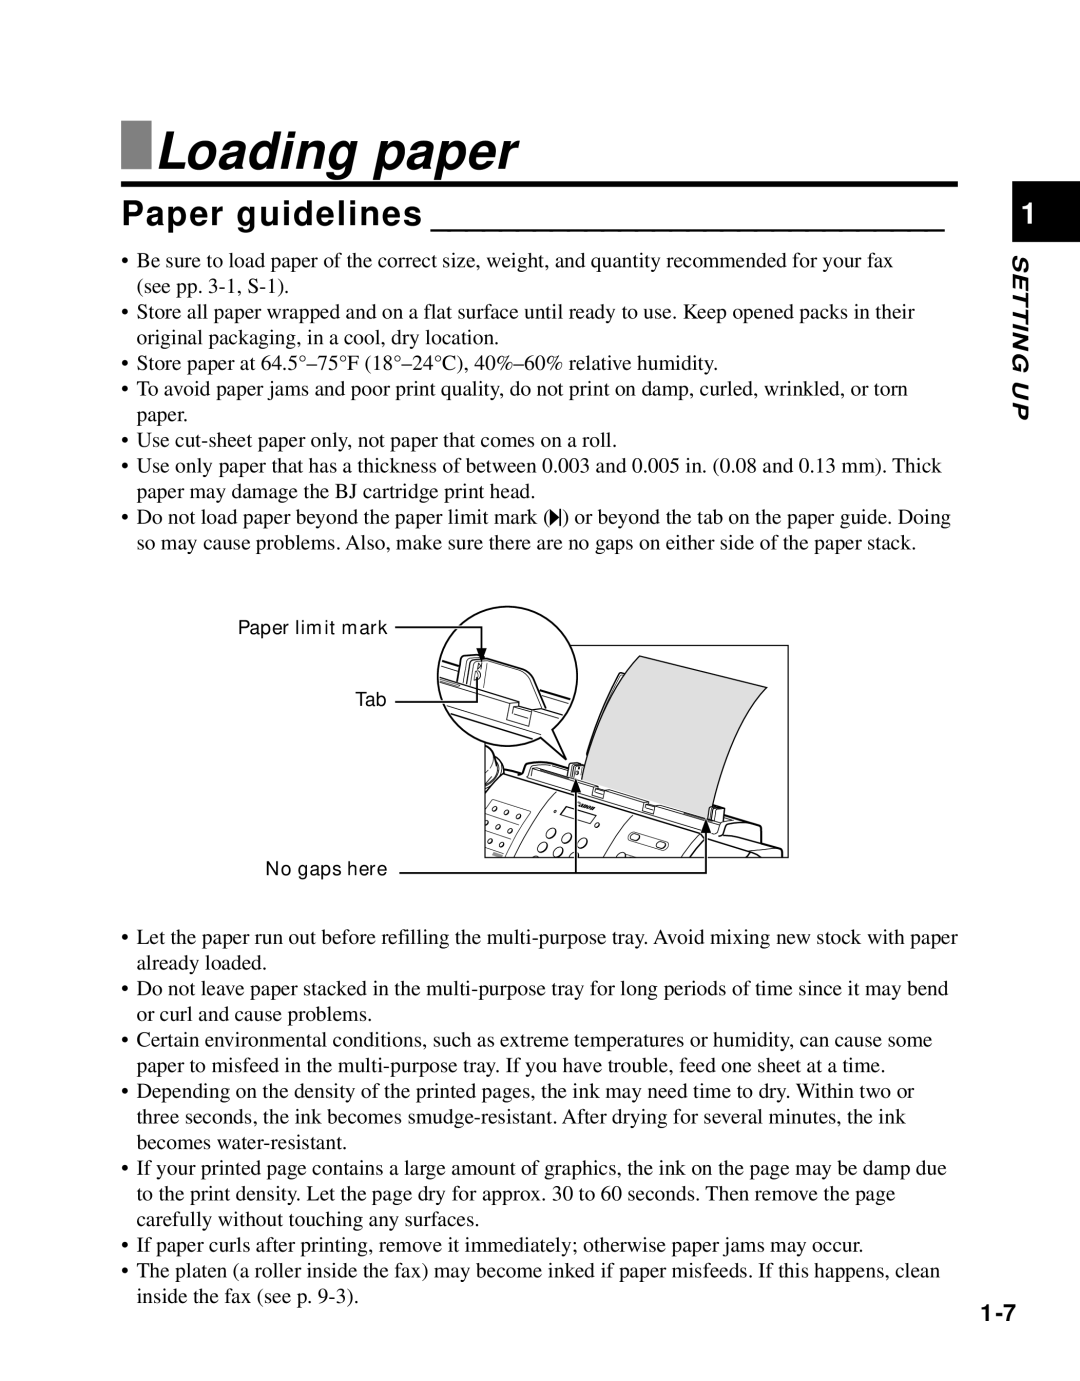 Canon B45 manual Loading paper, Paper guidelines 